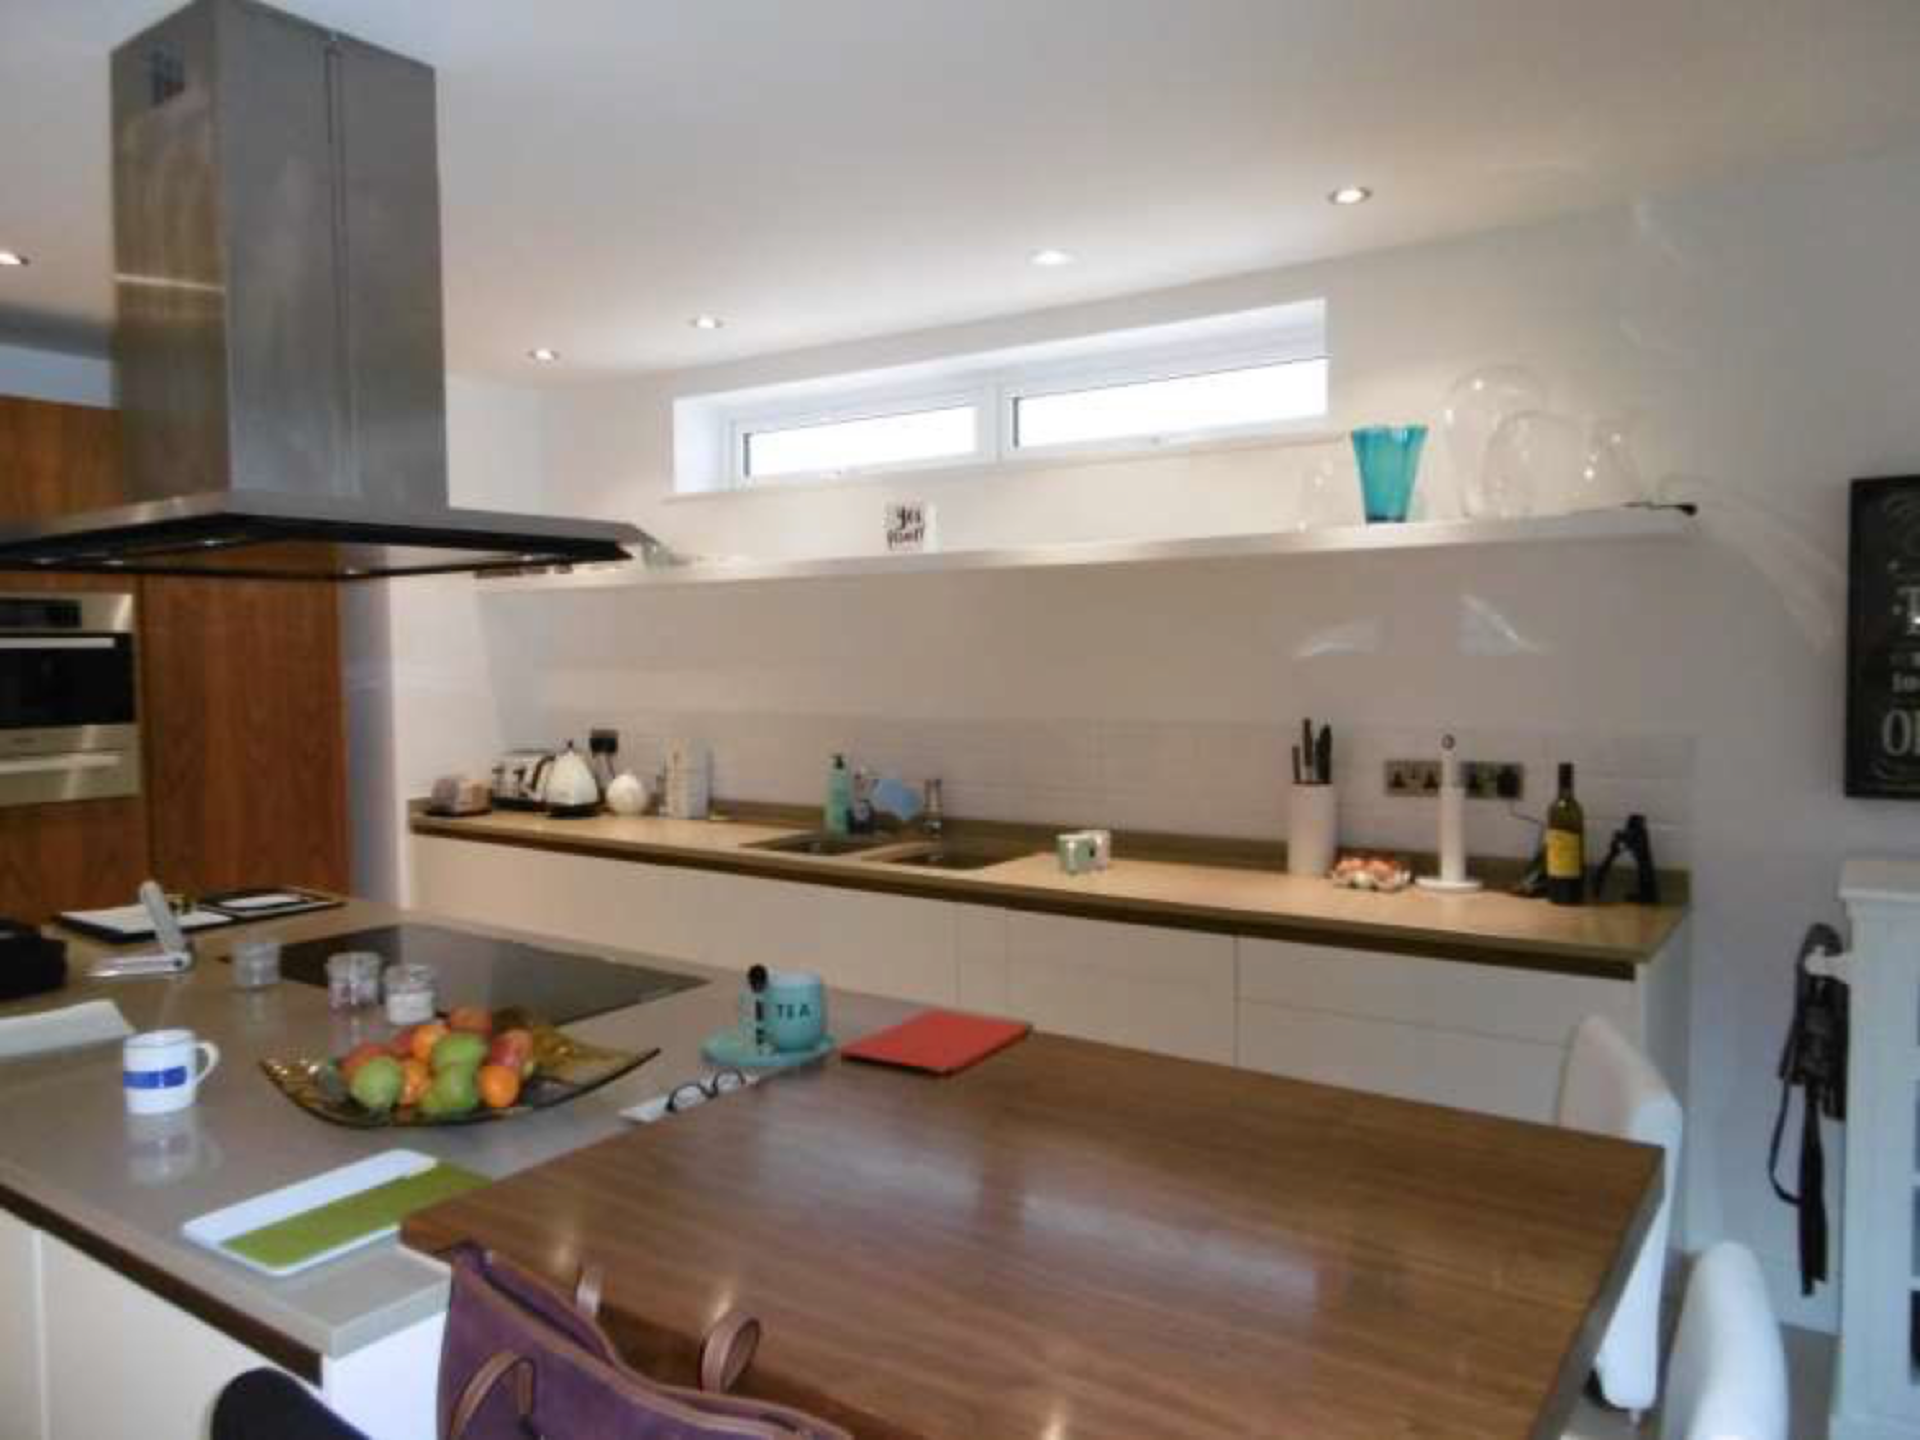 Luxury Contemporary High Glass Cream and Cherry Kitchen with Extensive range of Miele Appliances. - Image 4 of 5